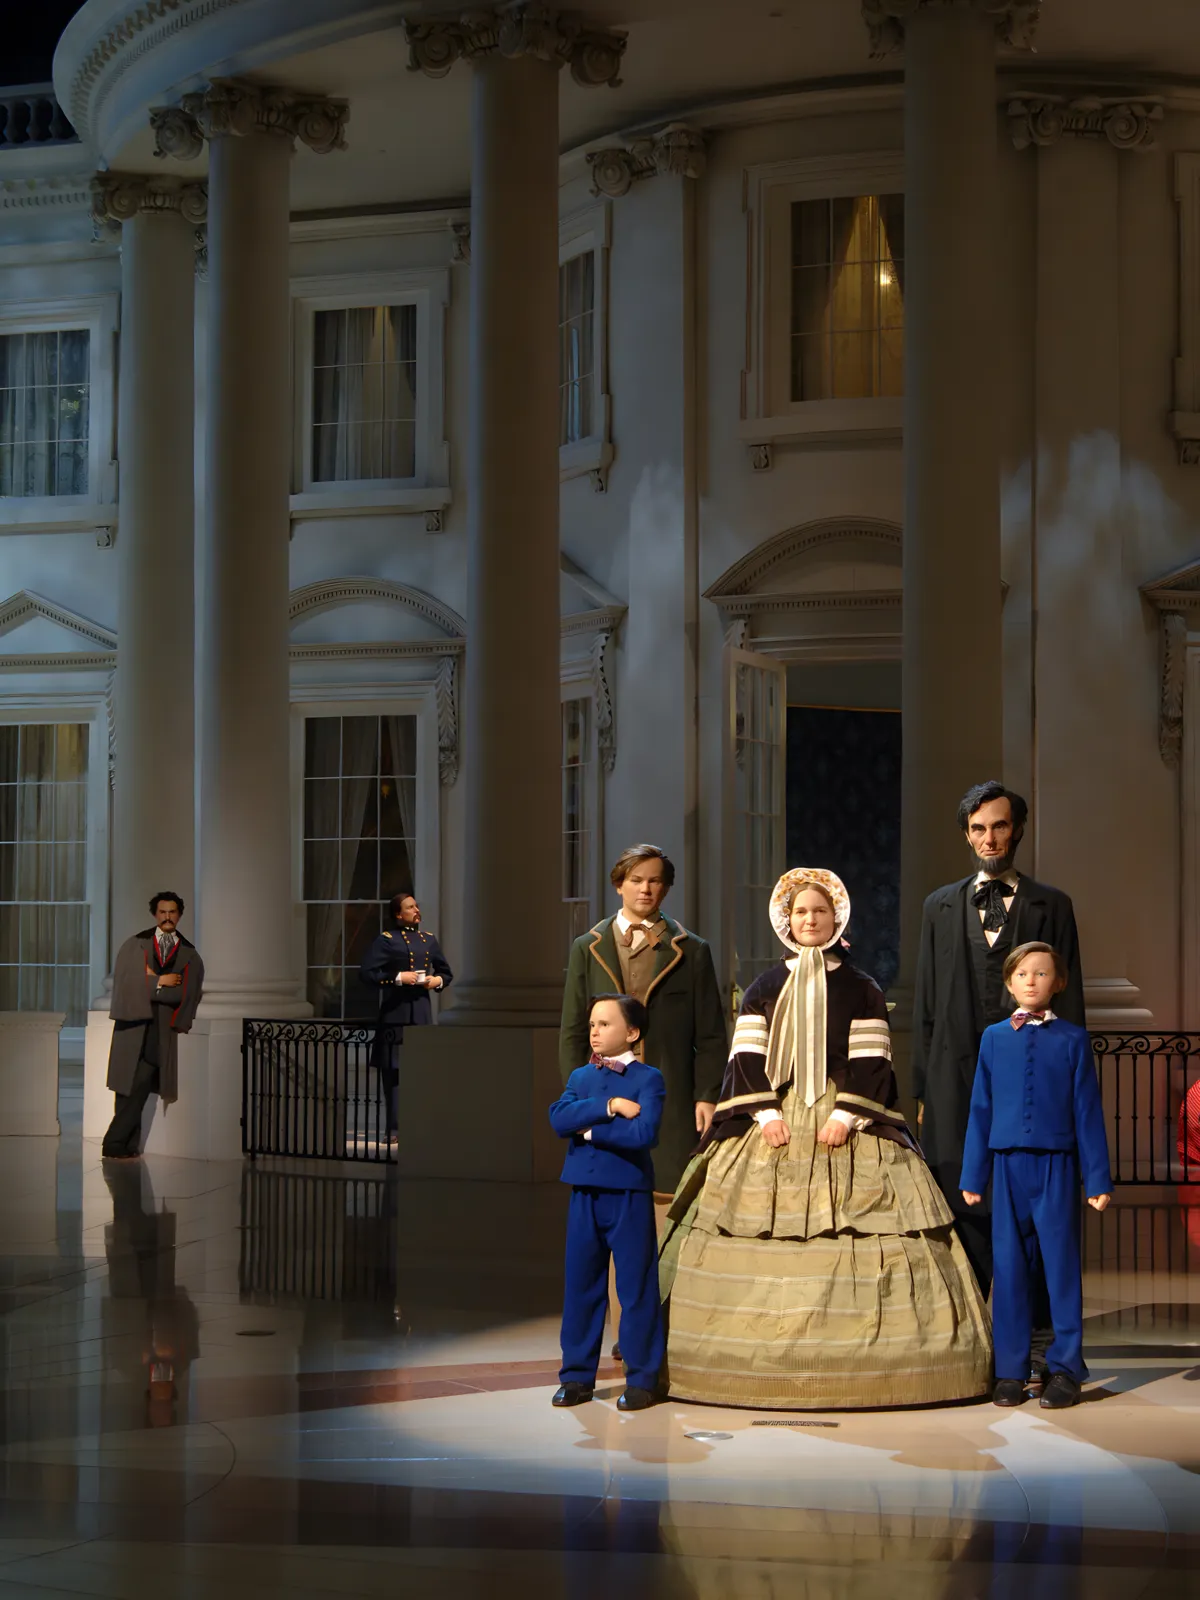 Figures of Abraham Lincoln and his family standing together